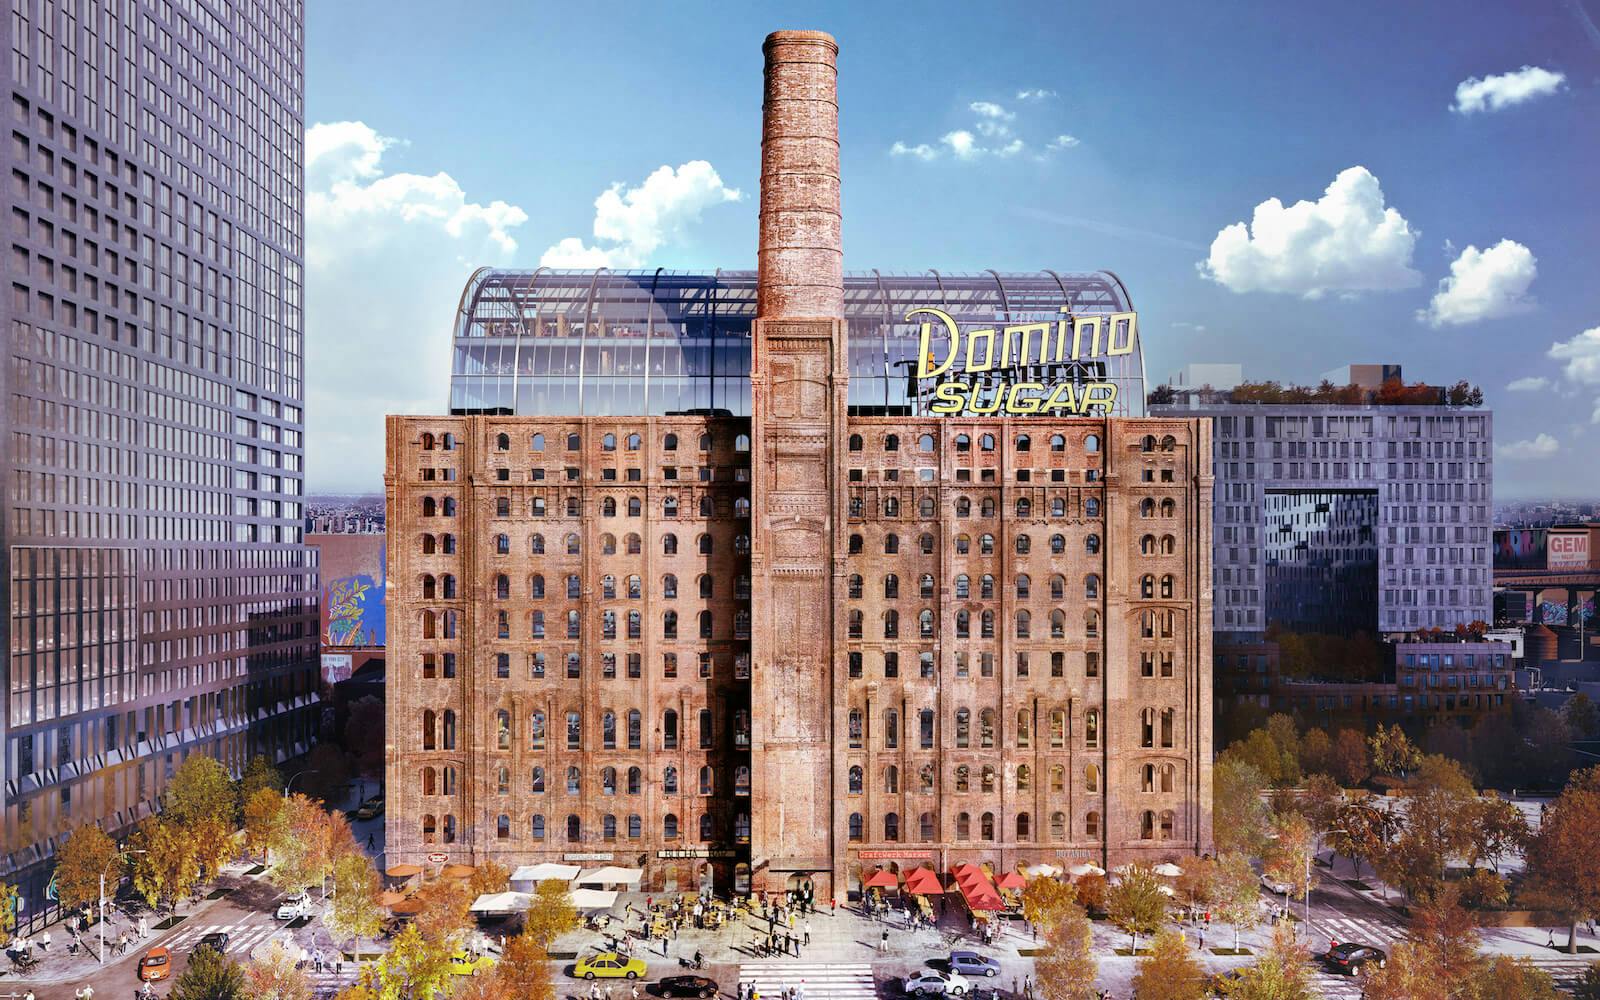 Sweet deal! Domino Sugar Refinery lands first tenant